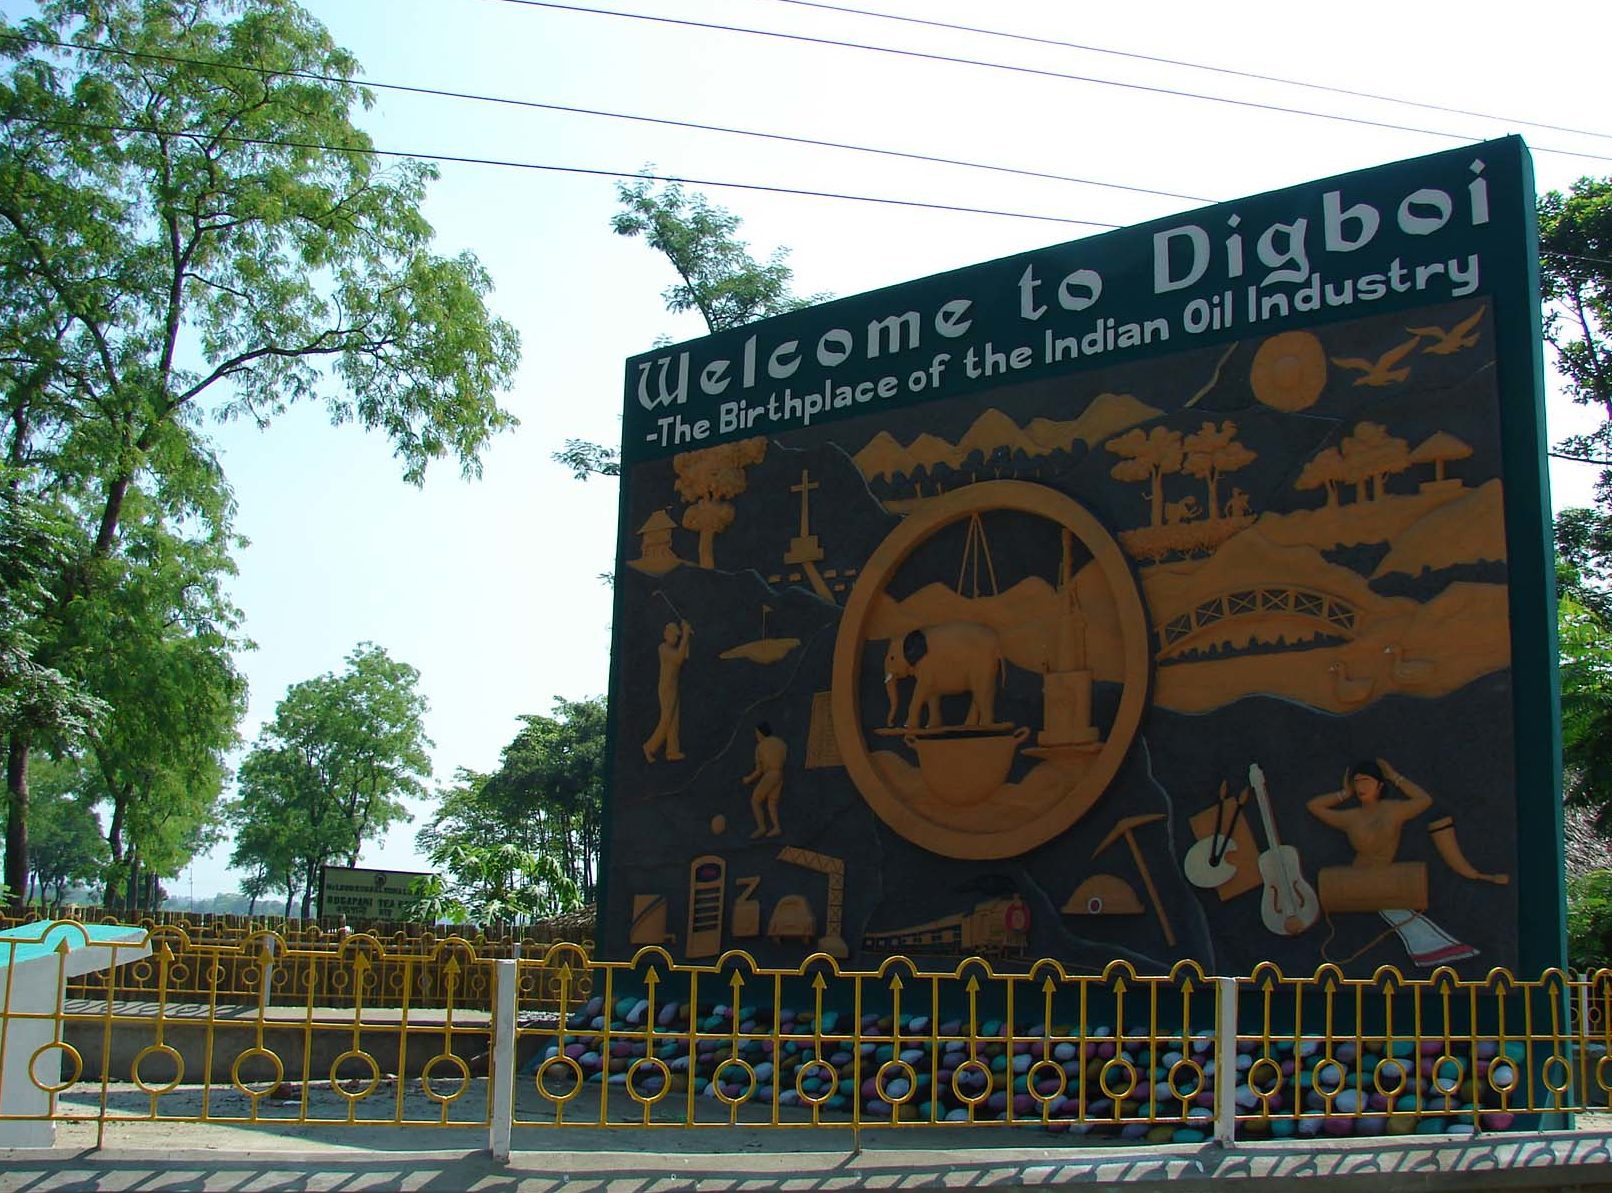 A sign post showing Welcome to Digboi